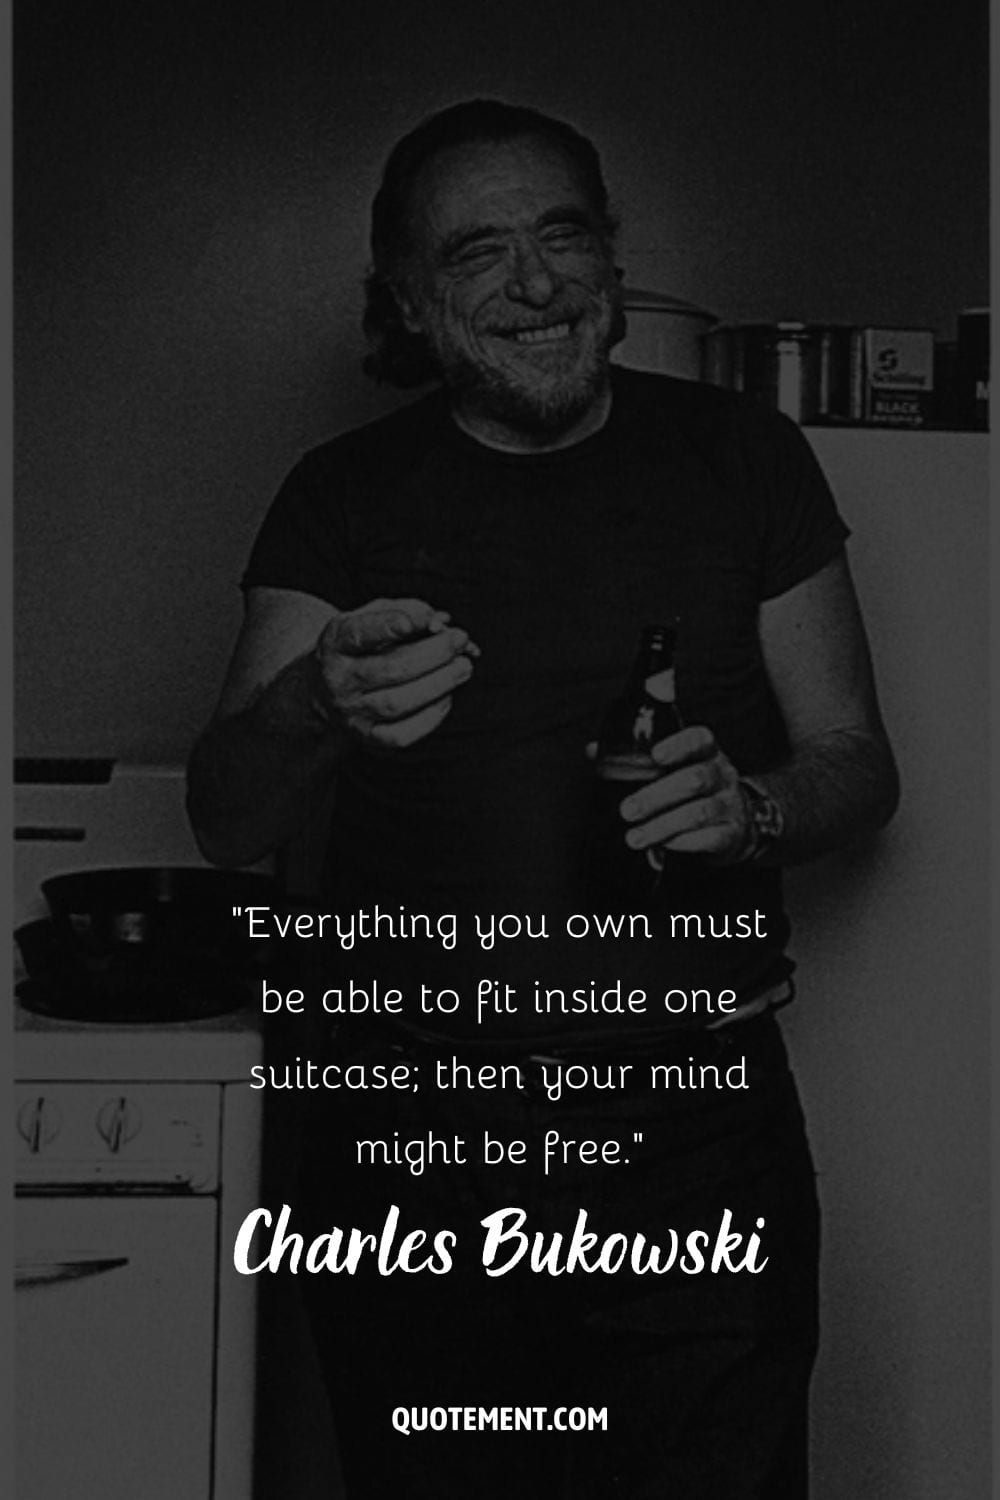 Charles Bukowski's kitchen moment cigarette and beer in hand